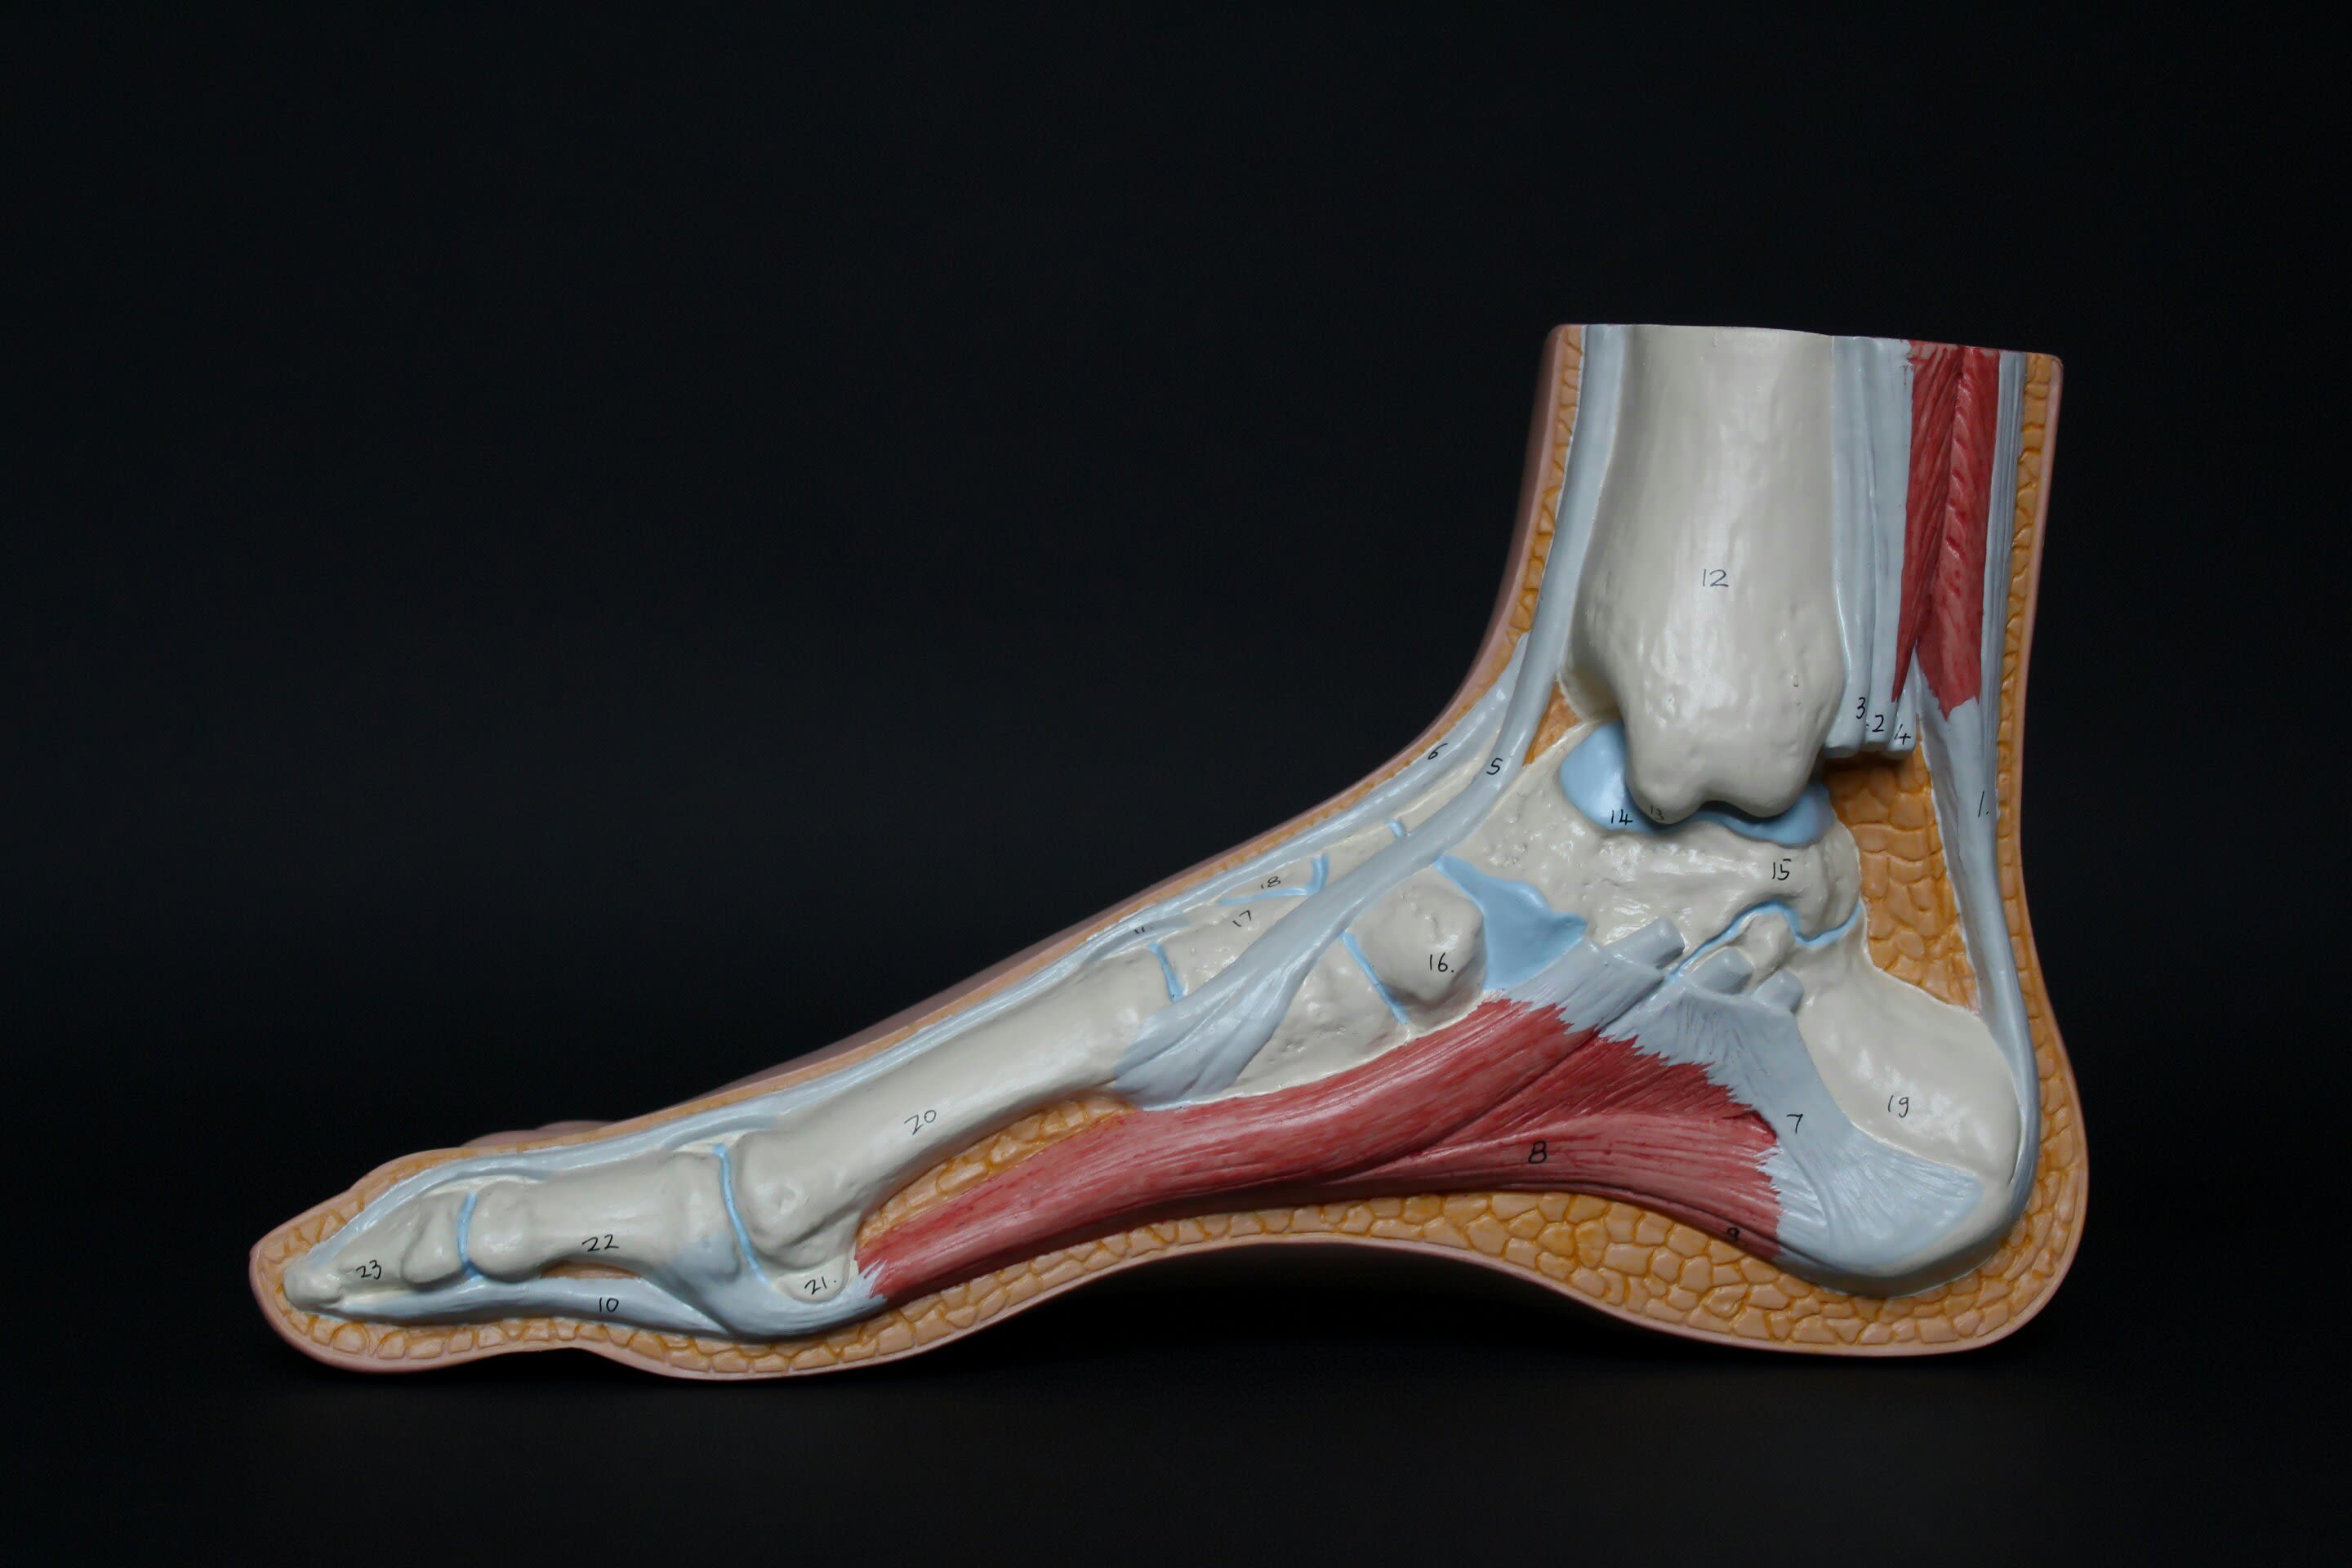 Returning to physical activity after first metatarsophalangeal arthrodesis